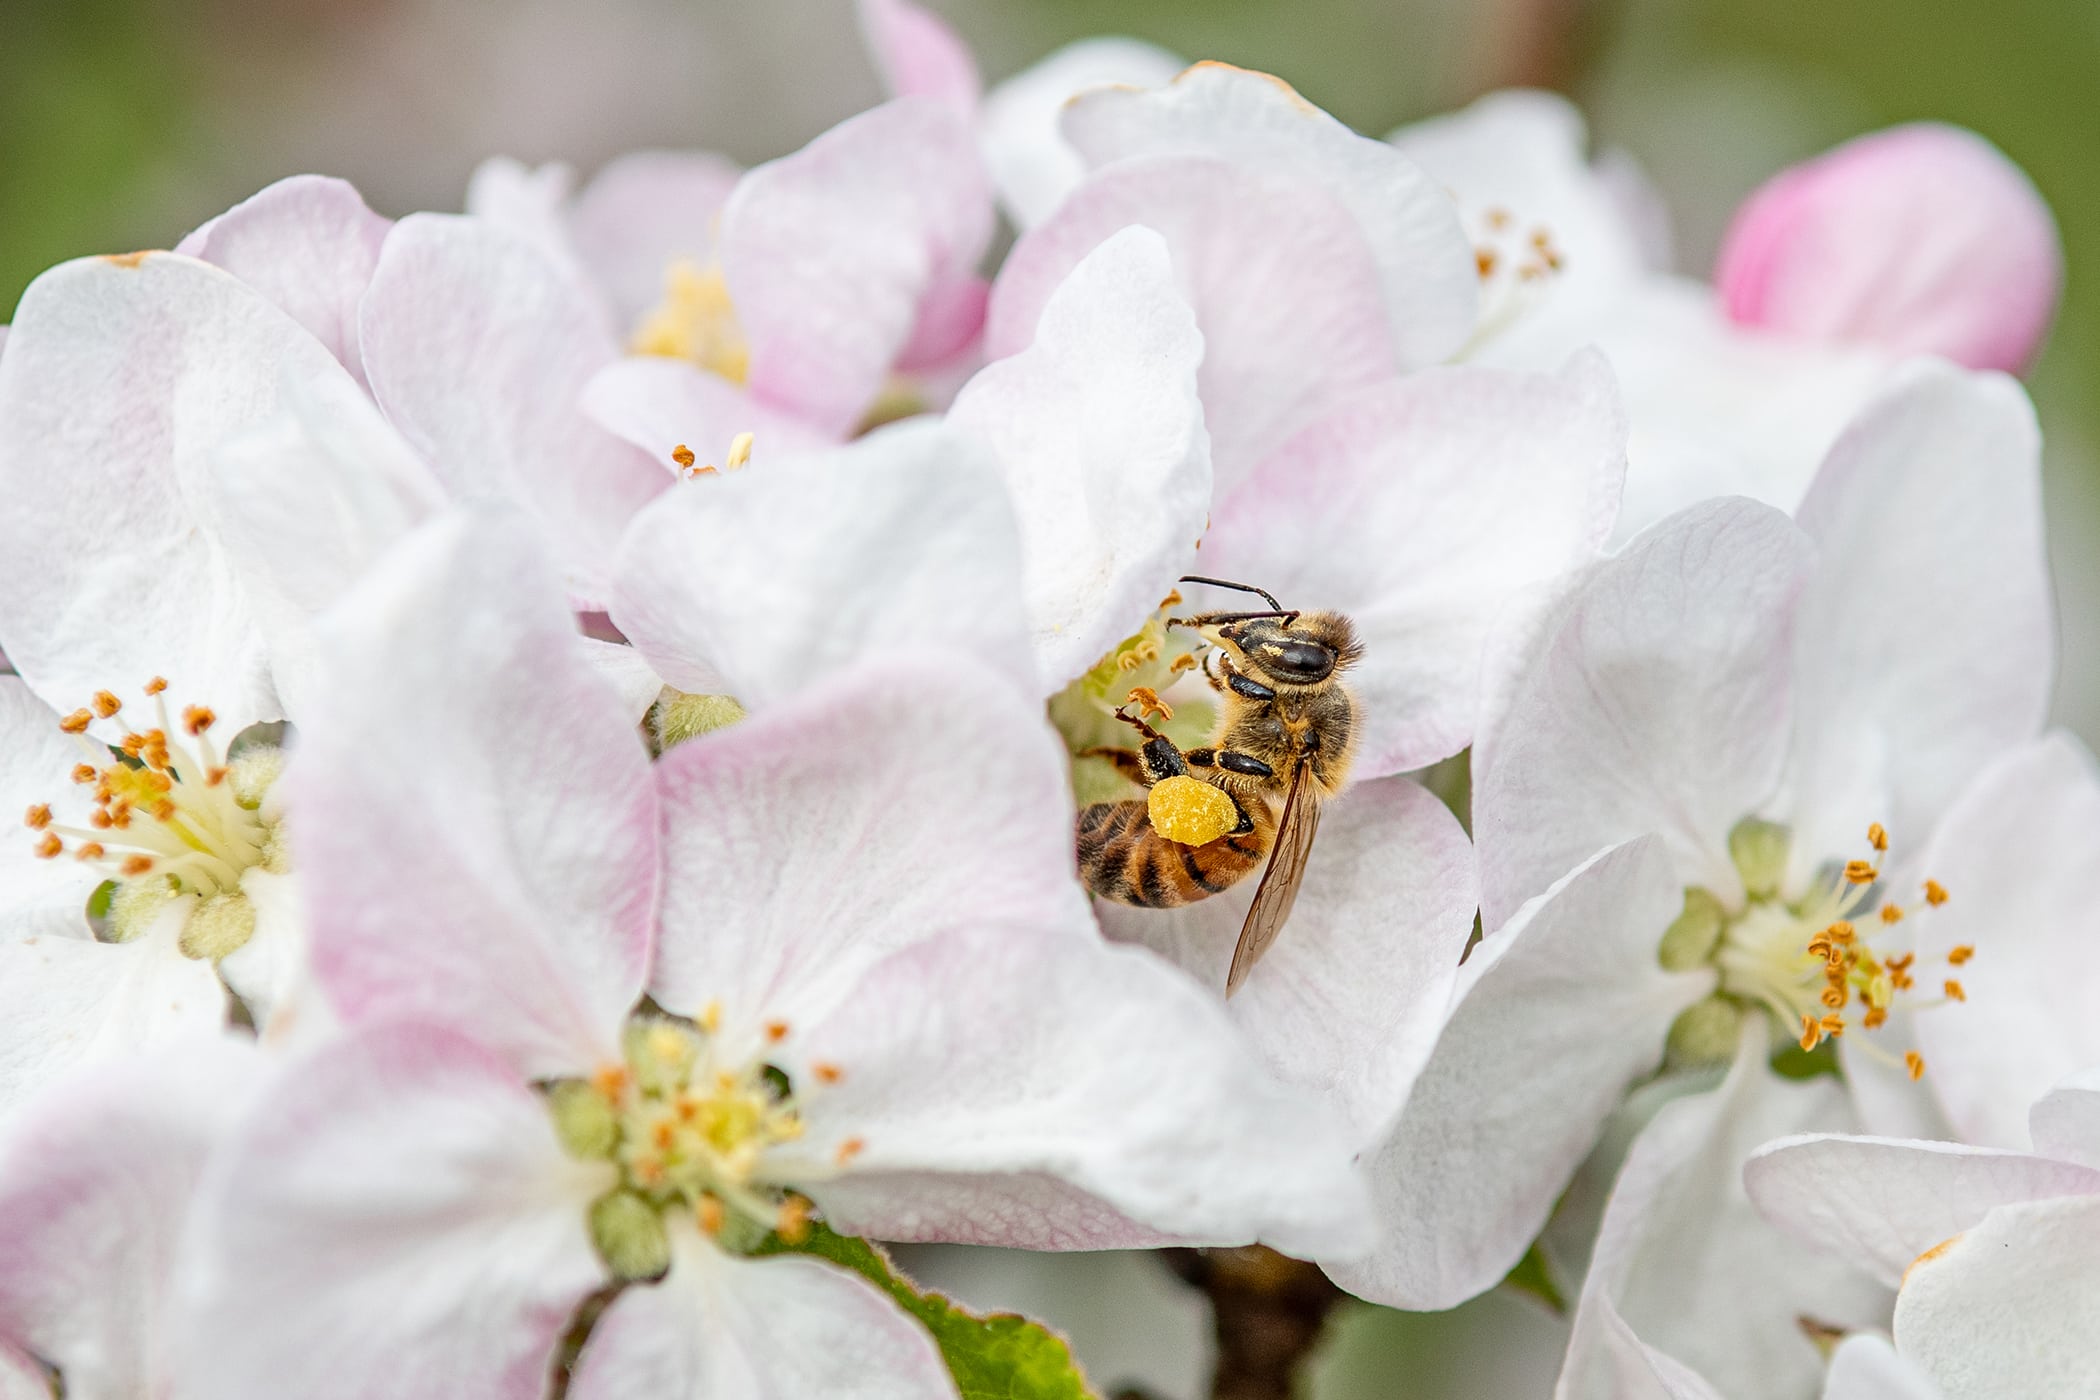 Bee-Killing Pesticides and What We Can Do to Help